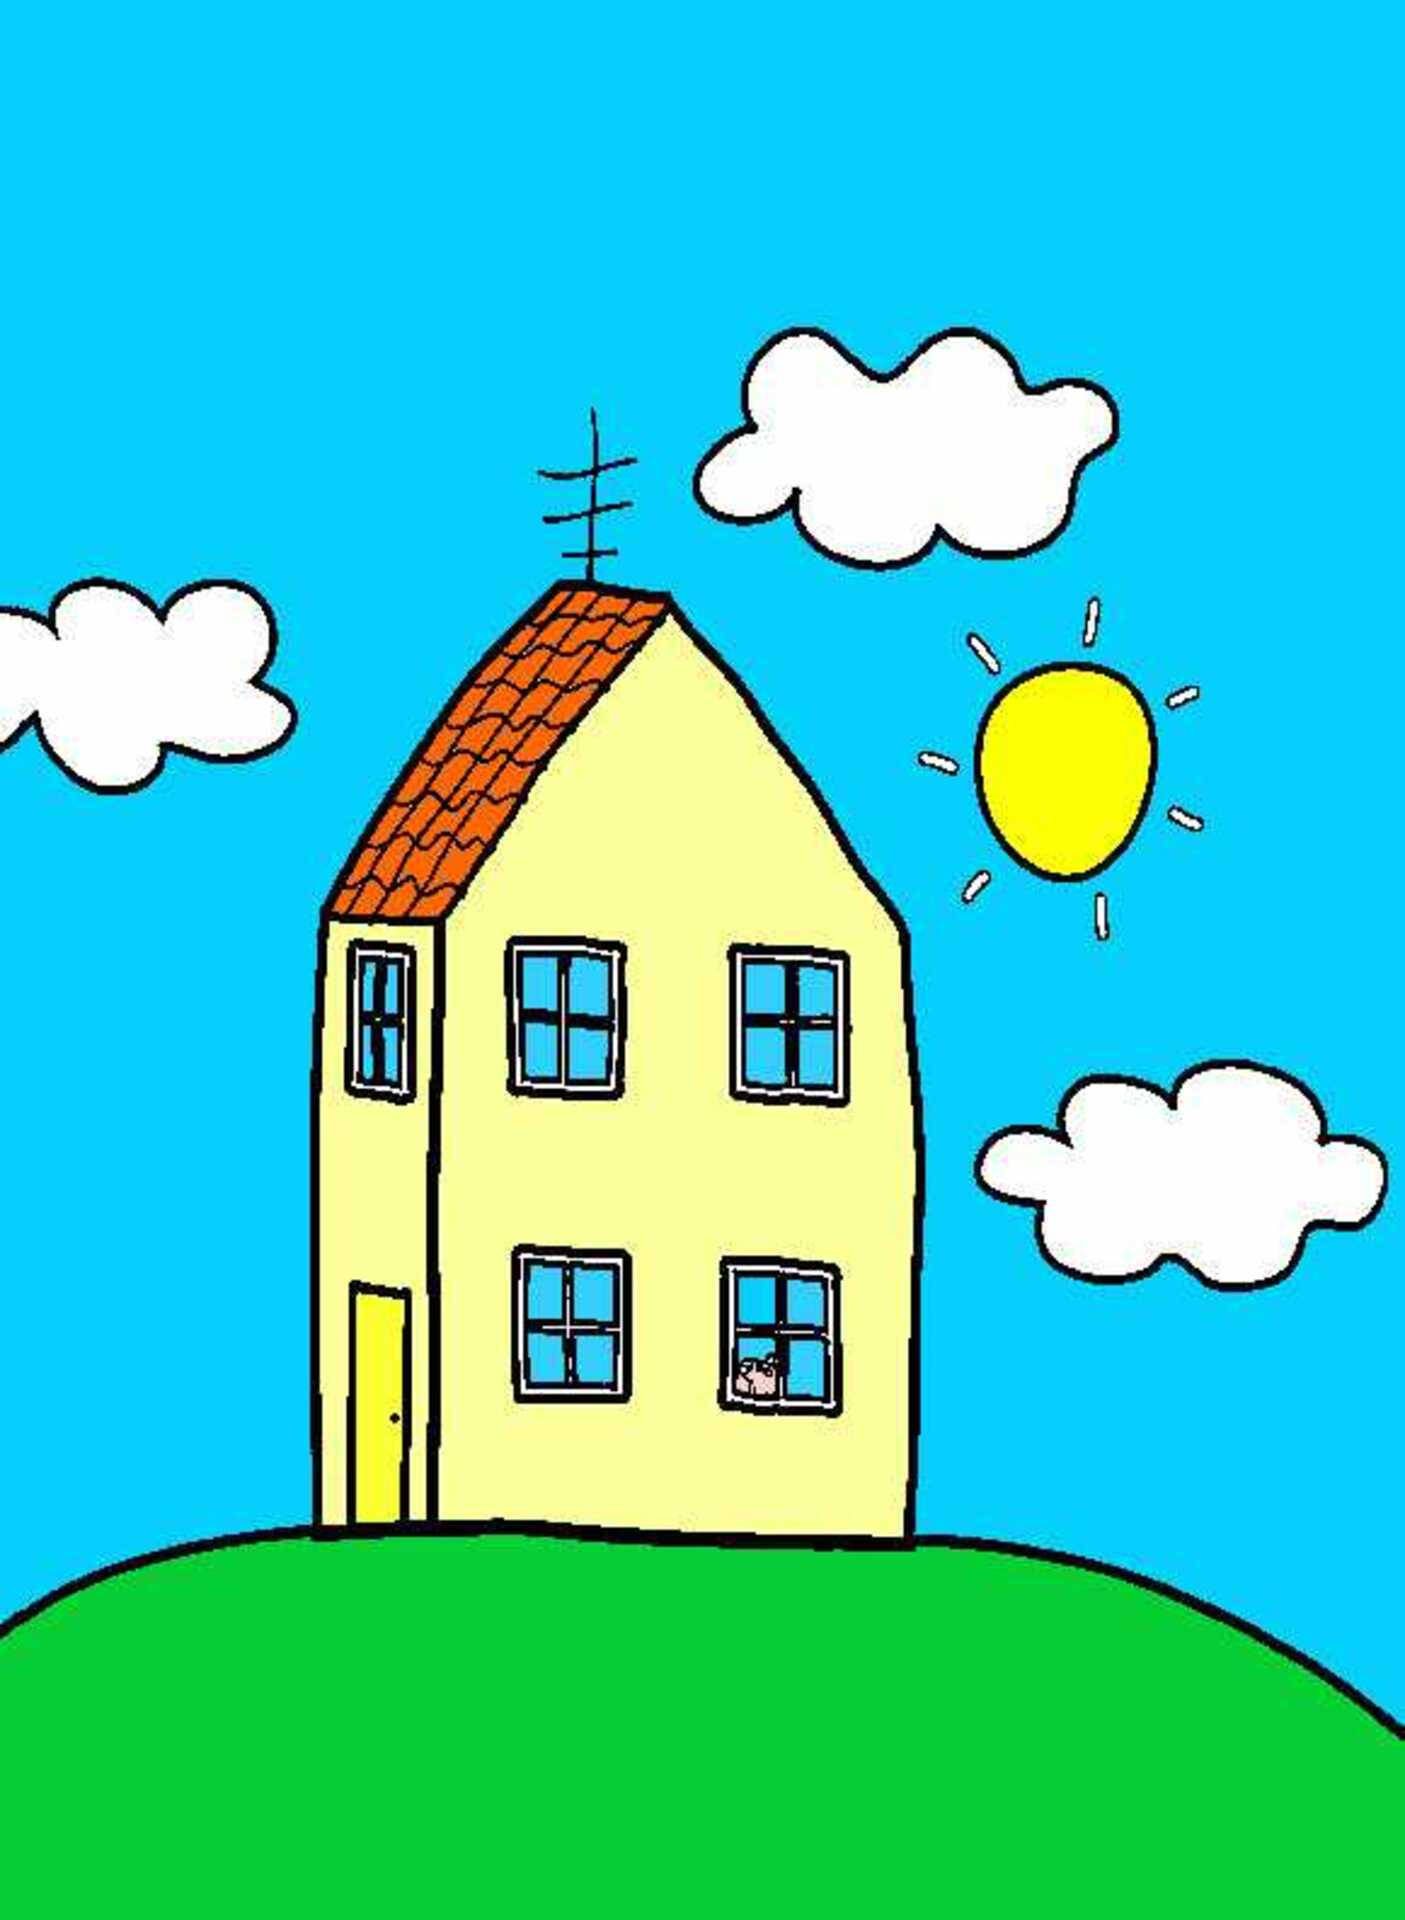 Enjoy The Colorful Adventures Of Peppa Pig From Her Very Own House Background